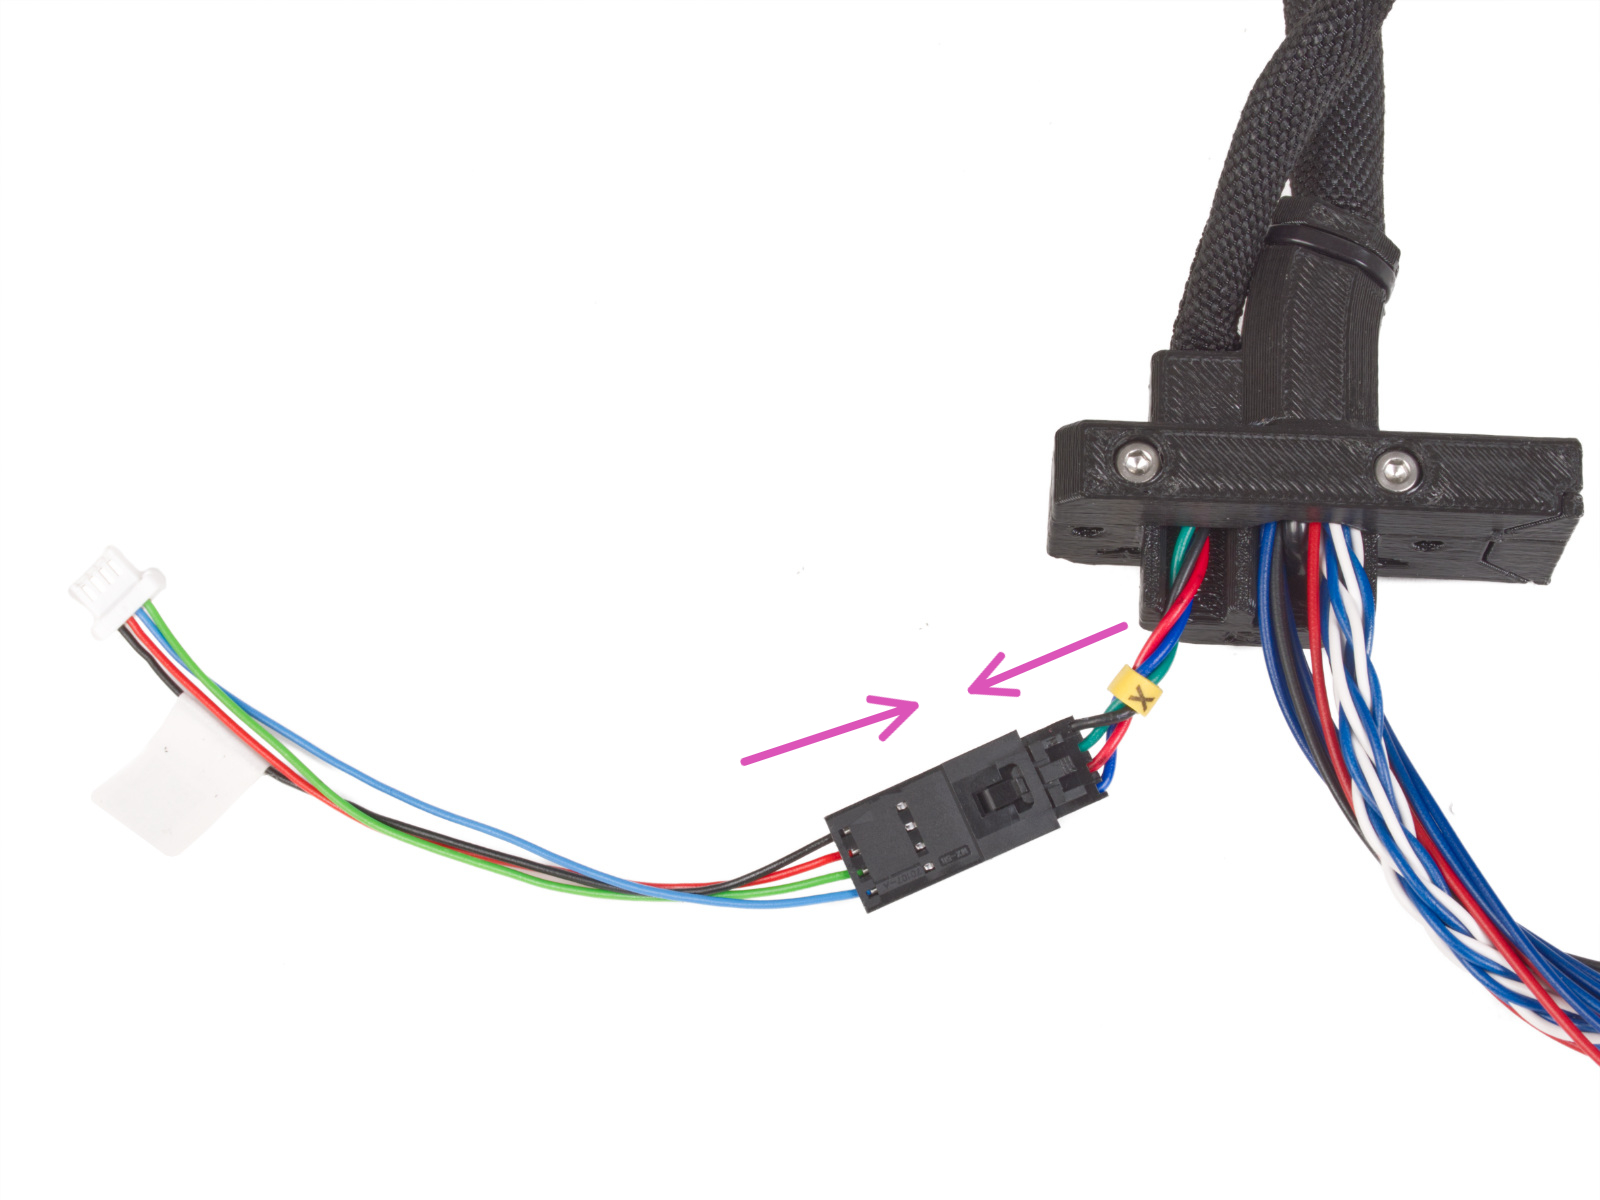 Connecting the X motor cable adapter